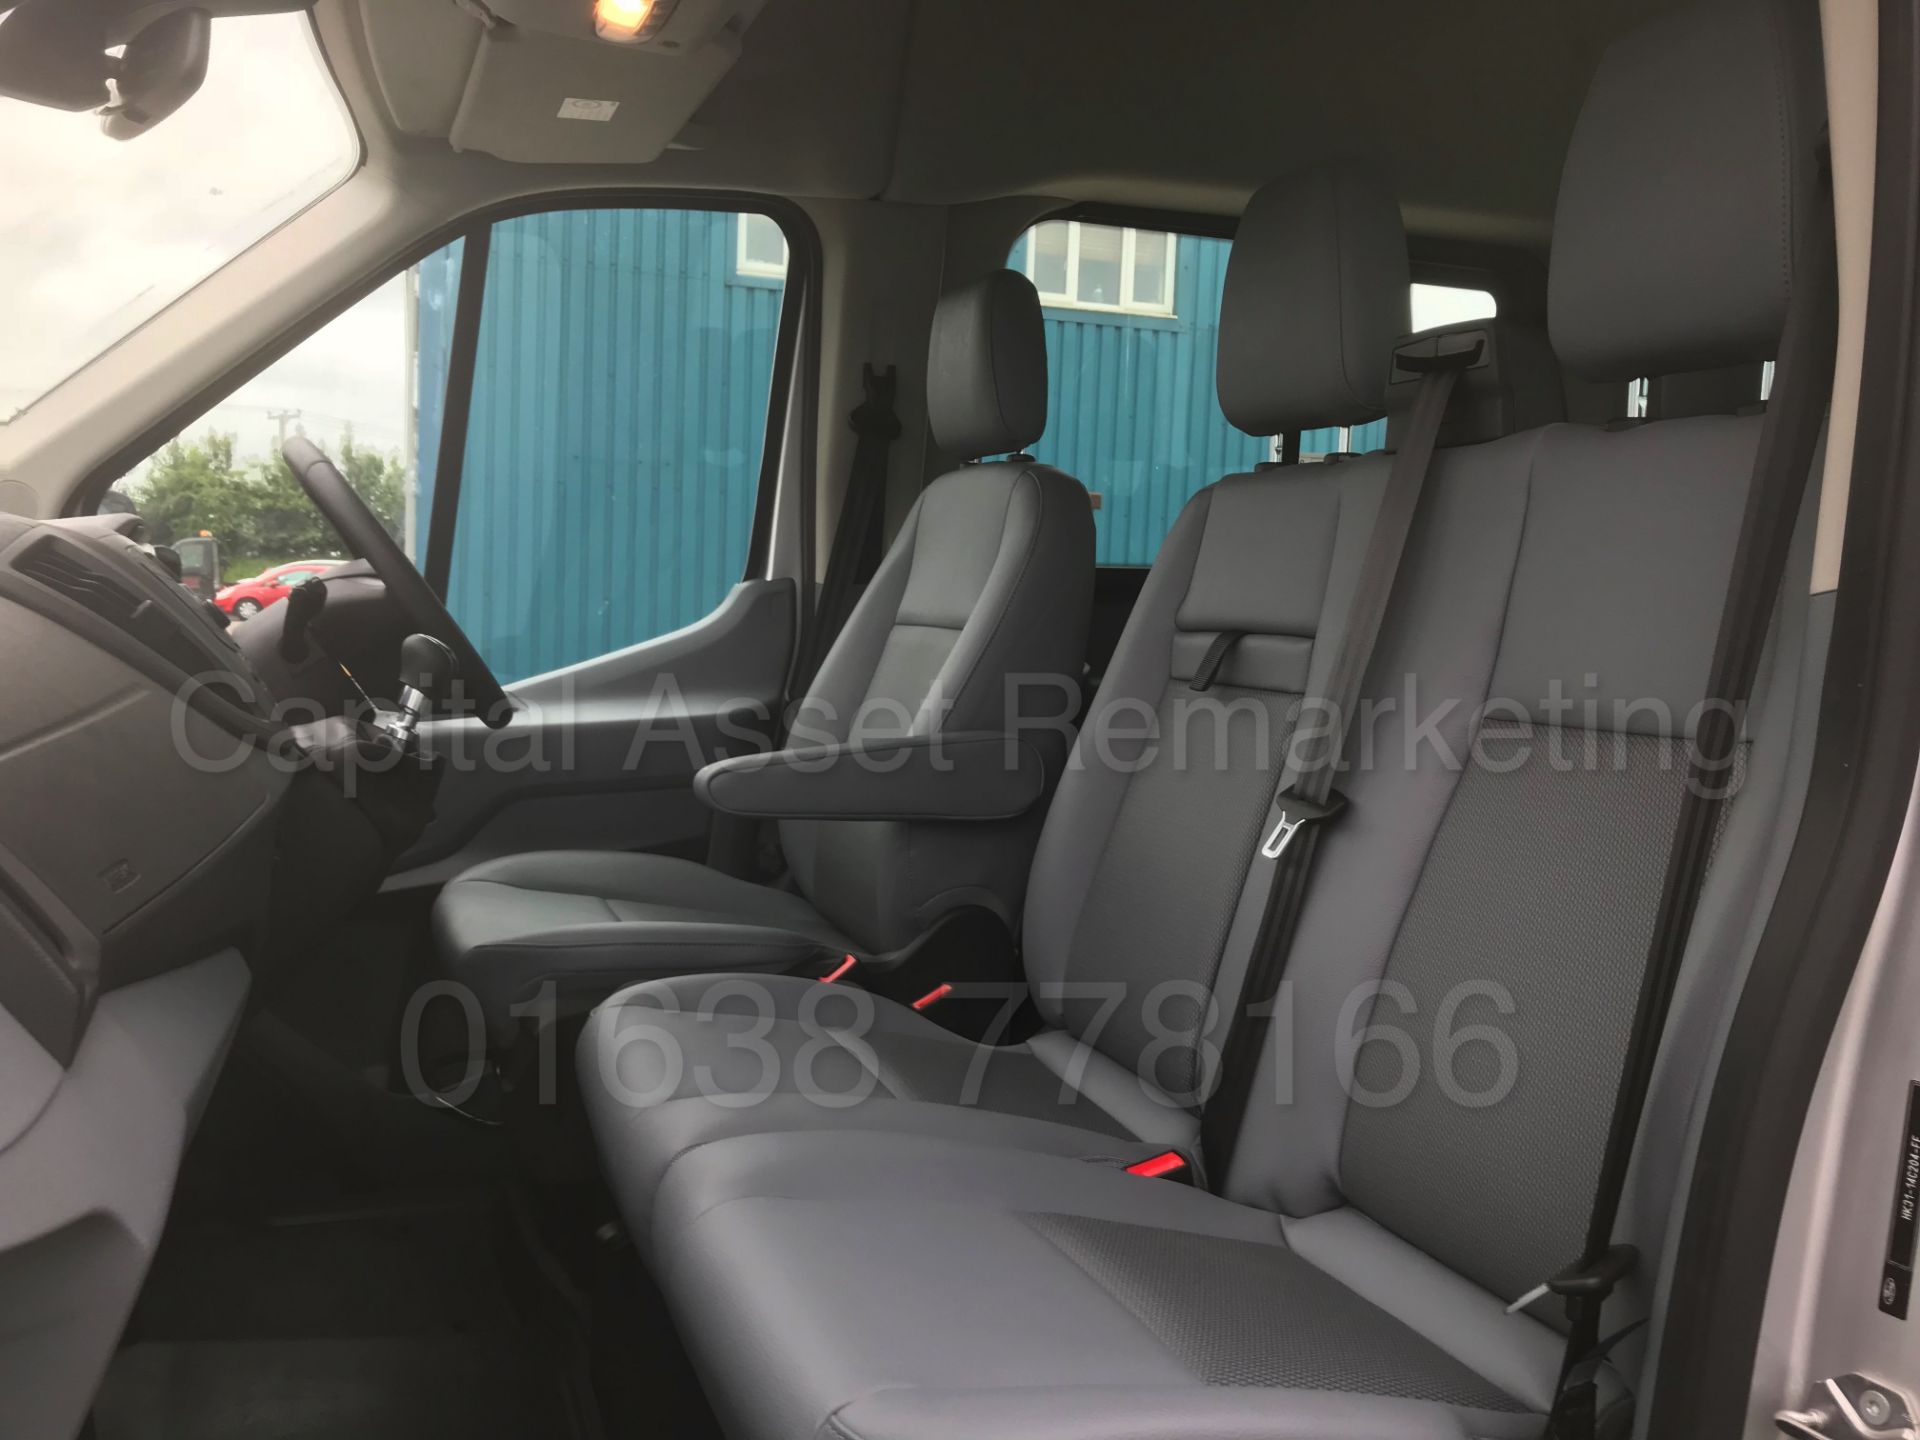 (On Sale) FORD TRANSIT LWB '15 SEATER MINI-BUS' (2018) '2.2 TDCI -125 BHP- 6 SPEED' 130 MILES ONLY ! - Image 24 of 50